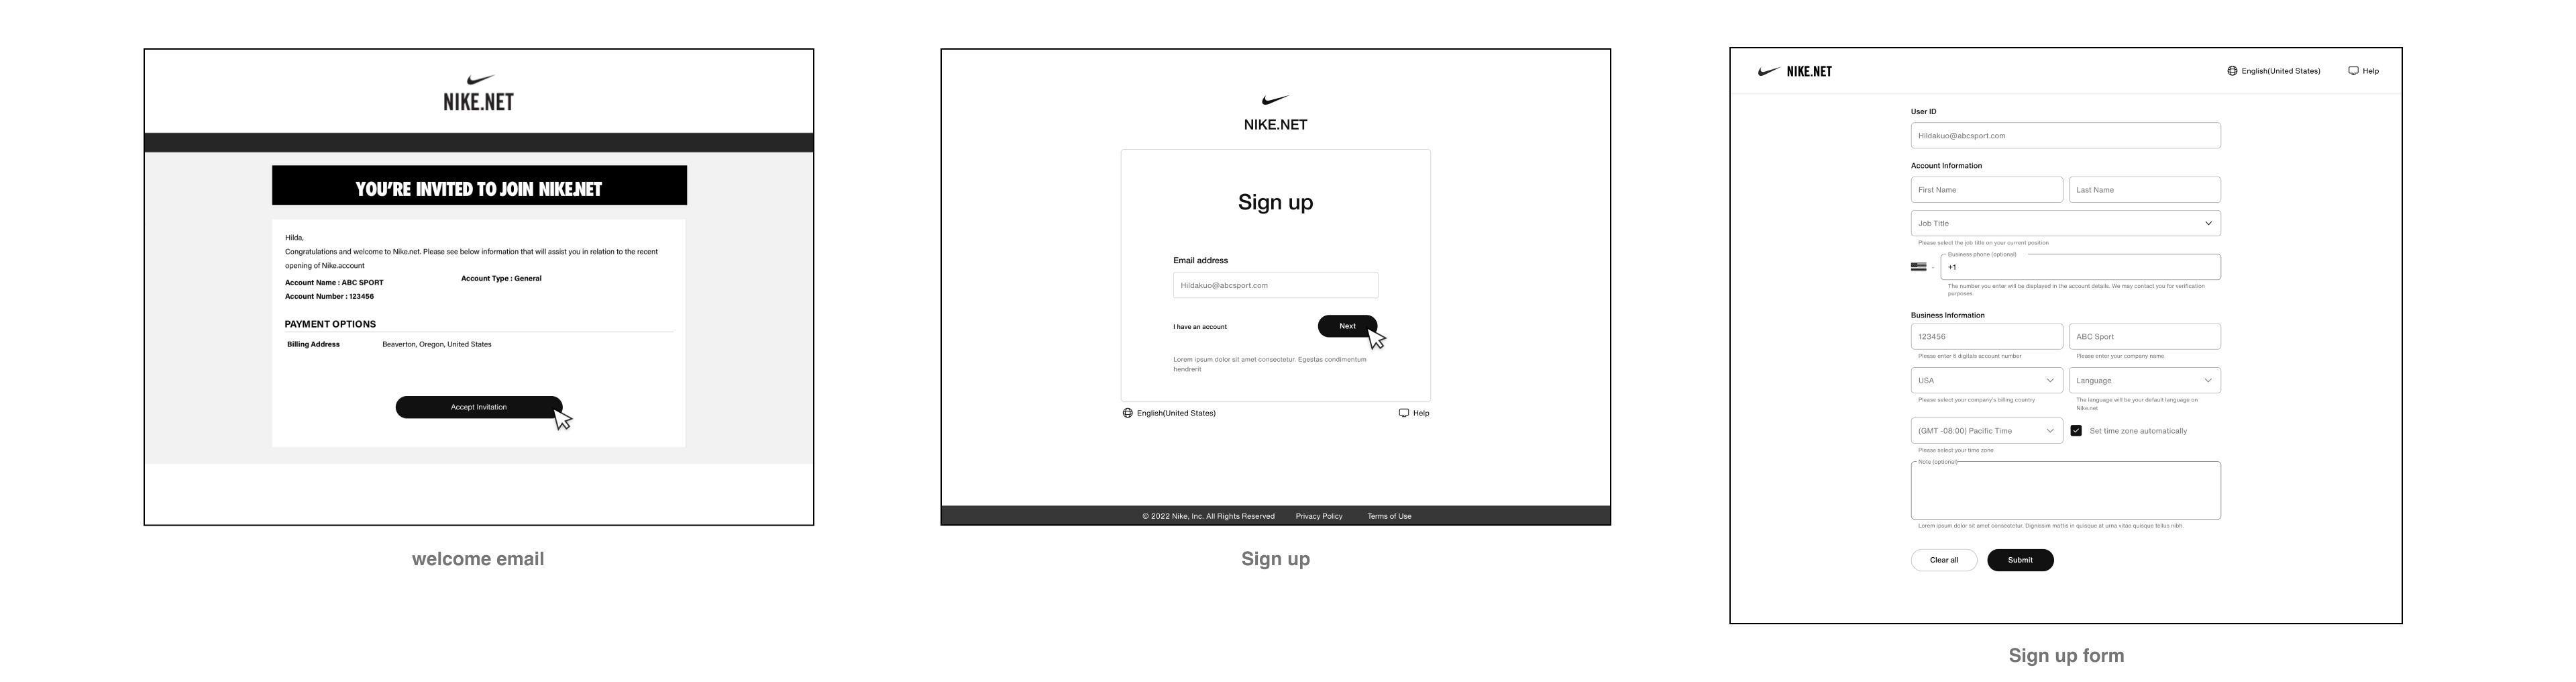 Wireframe-welcome sign up entry and form